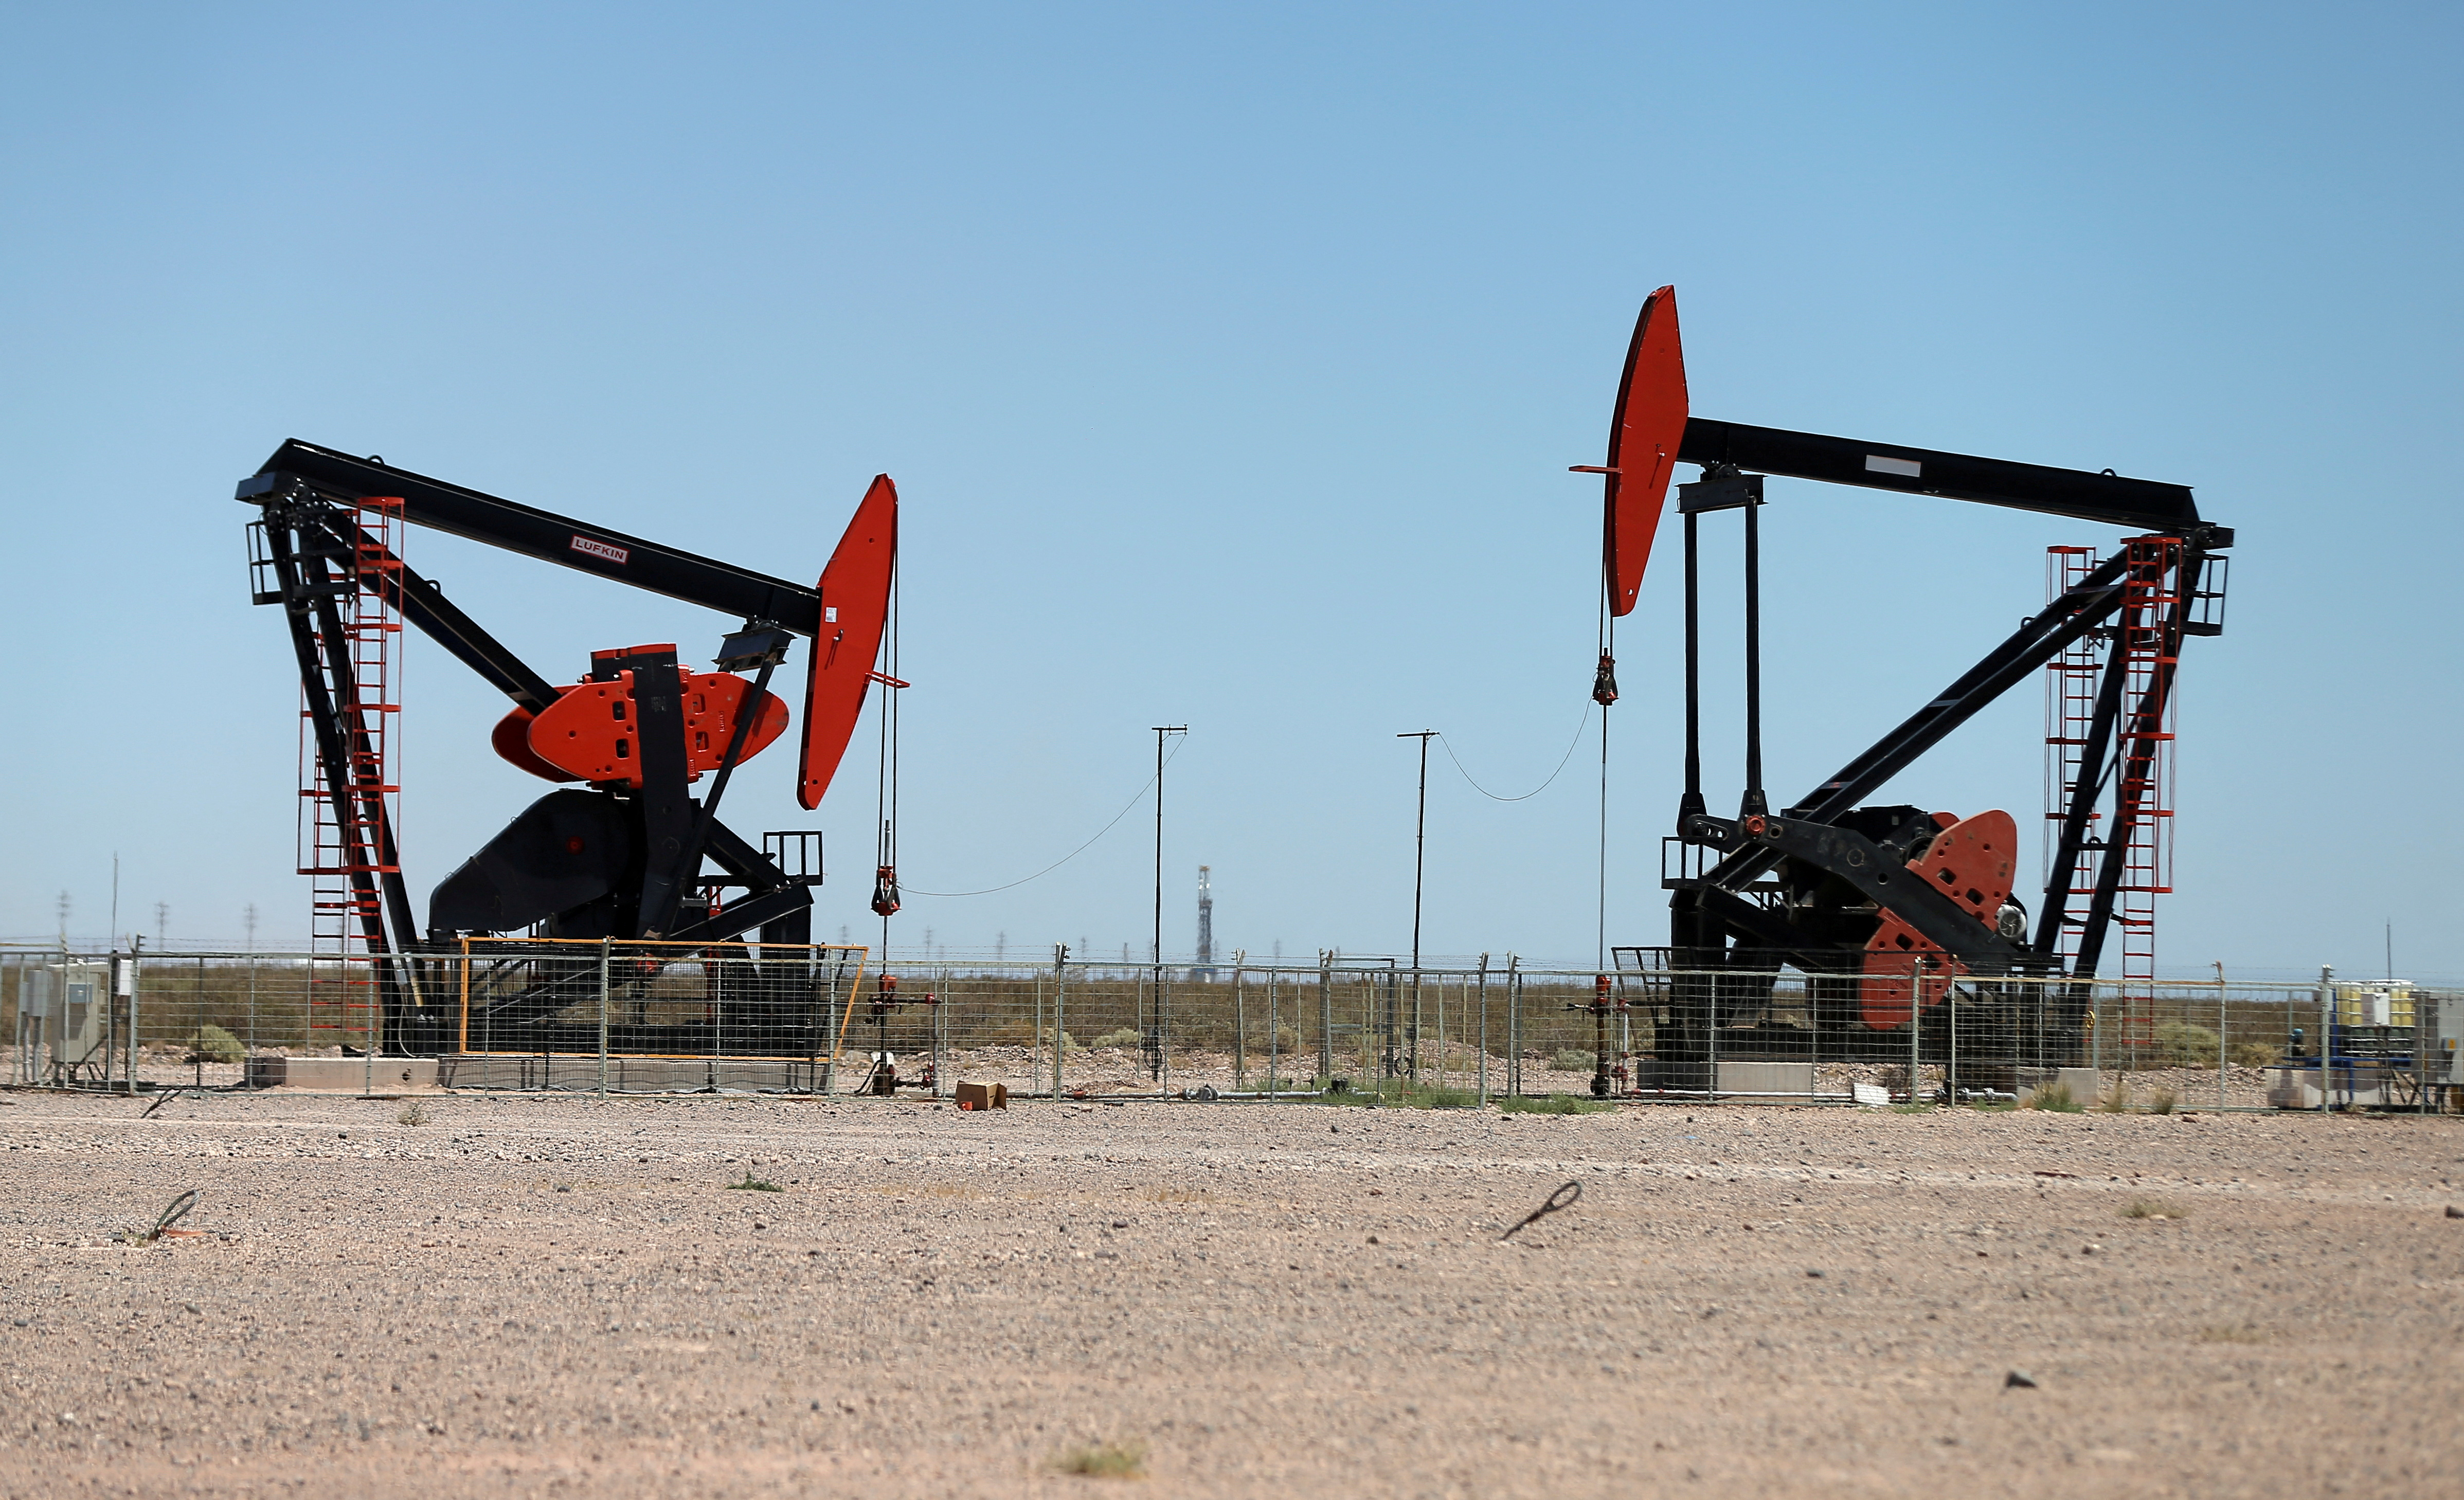 Oil pump jacks are seen at Vaca Muerta shale oil and gas drilling, in the Patagonian province of Neuquen